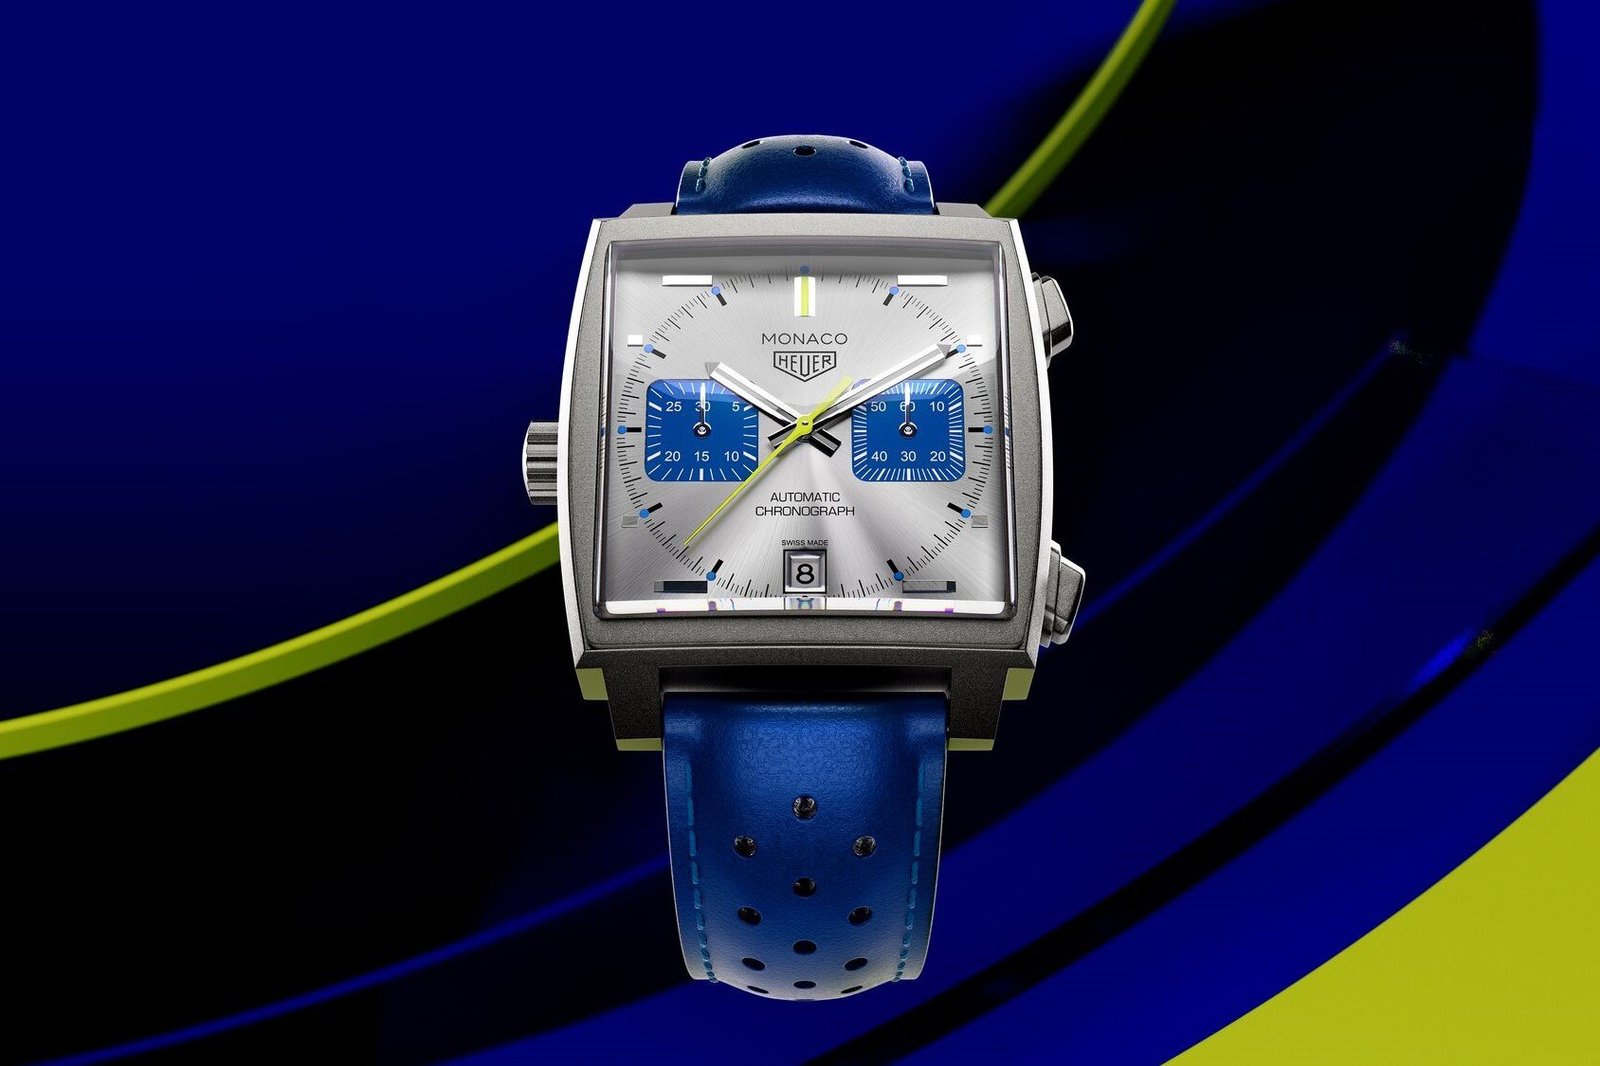 Introducing The Titanium TAG Heuer Monaco Chronograph Racing Blue Limited Edition